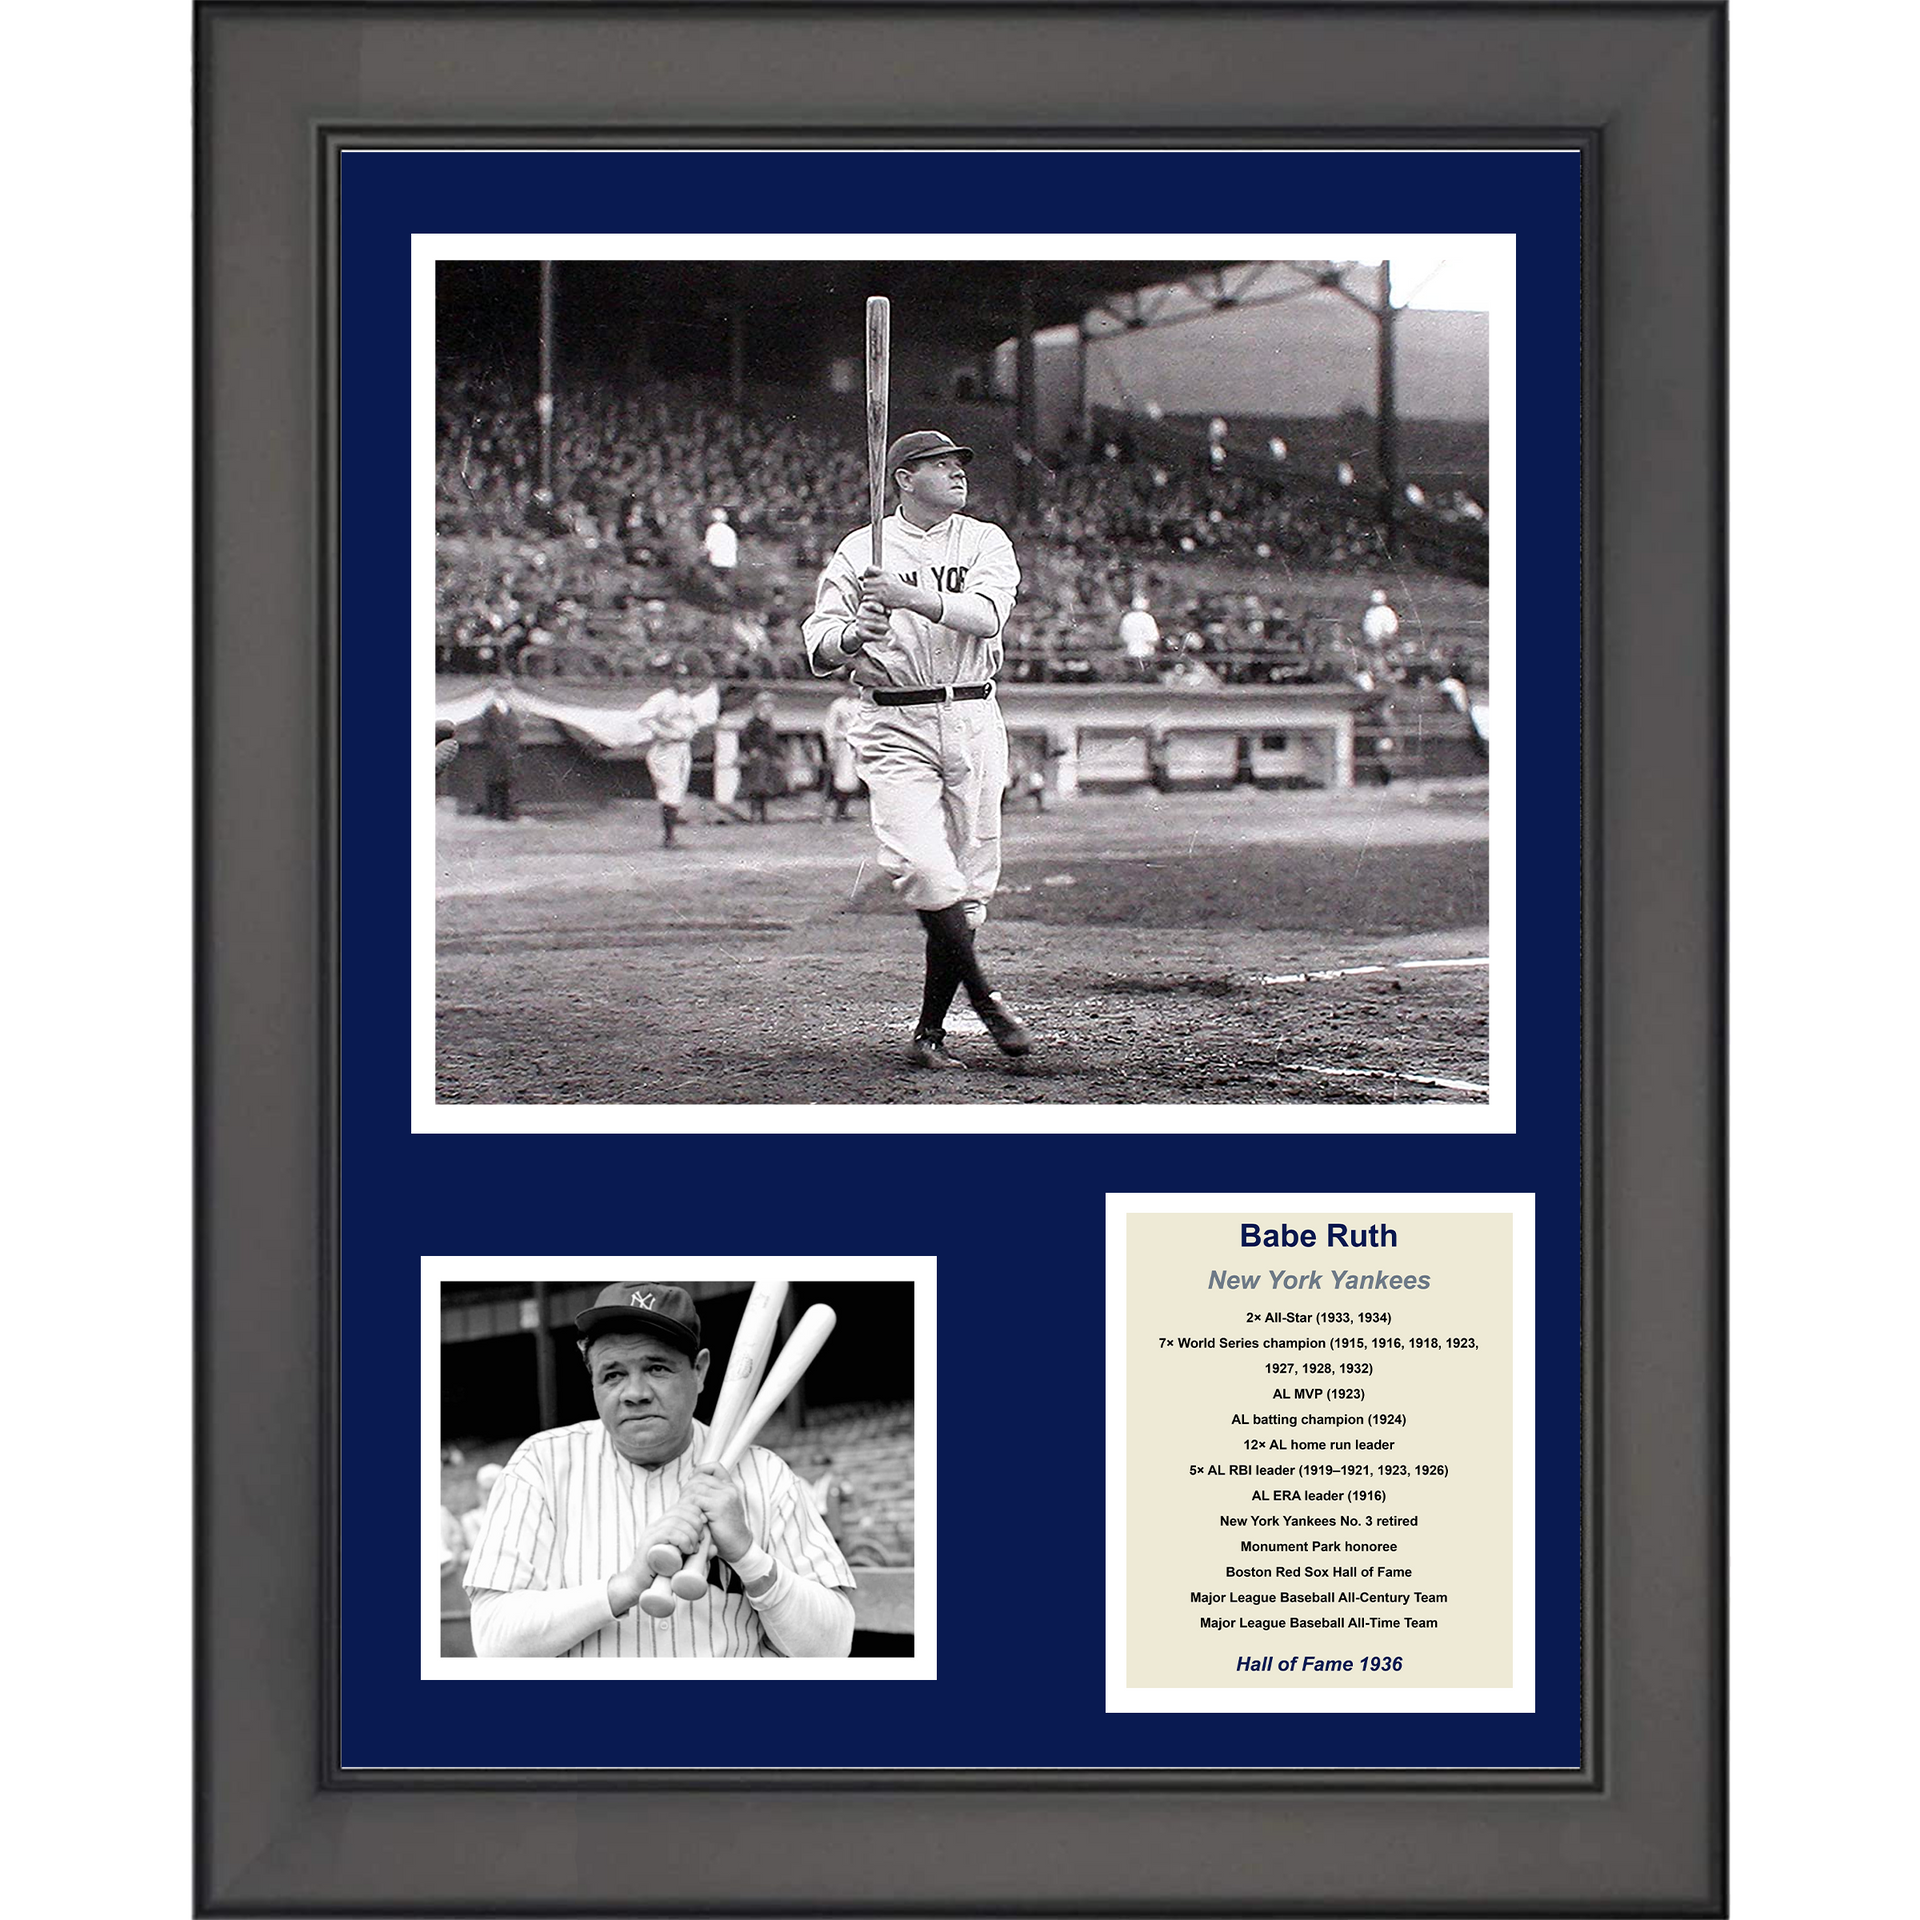 Framed Babe Ruth Hall of Fame New York Yankees Baseball 12x15 Photo  Collage - Hall of Fame Sports Memorabilia